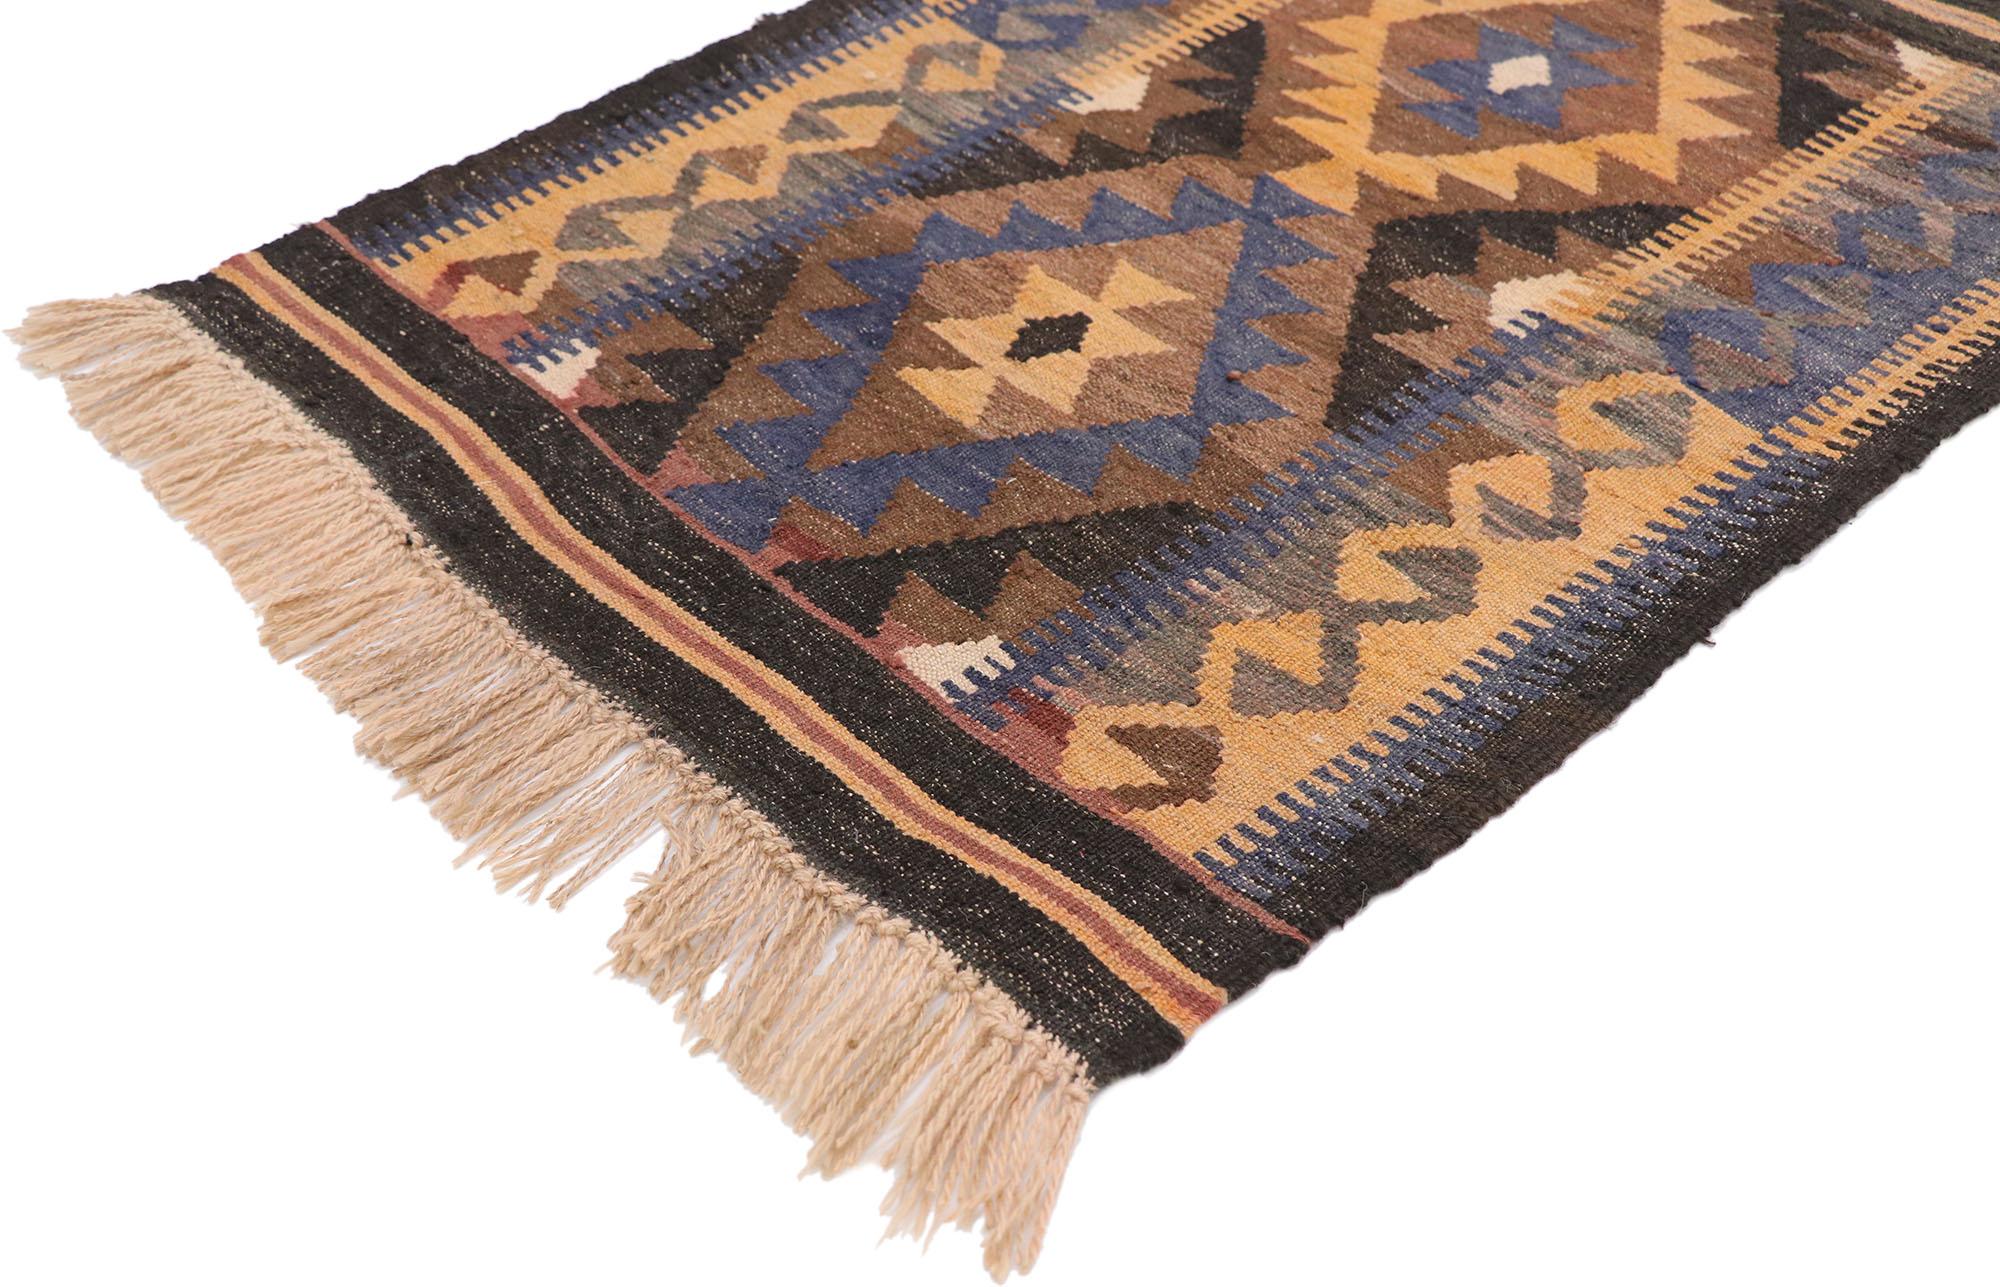 77876 Vintage Afghani Maimana Kilim rug with Modern Tribal Style 02'04 x 03'04. Full of tiny details and a bold expressive design combined with vibrant colors and tribal style, this hand-woven wool vintage Afghani Maimana kilim rug is a captivating